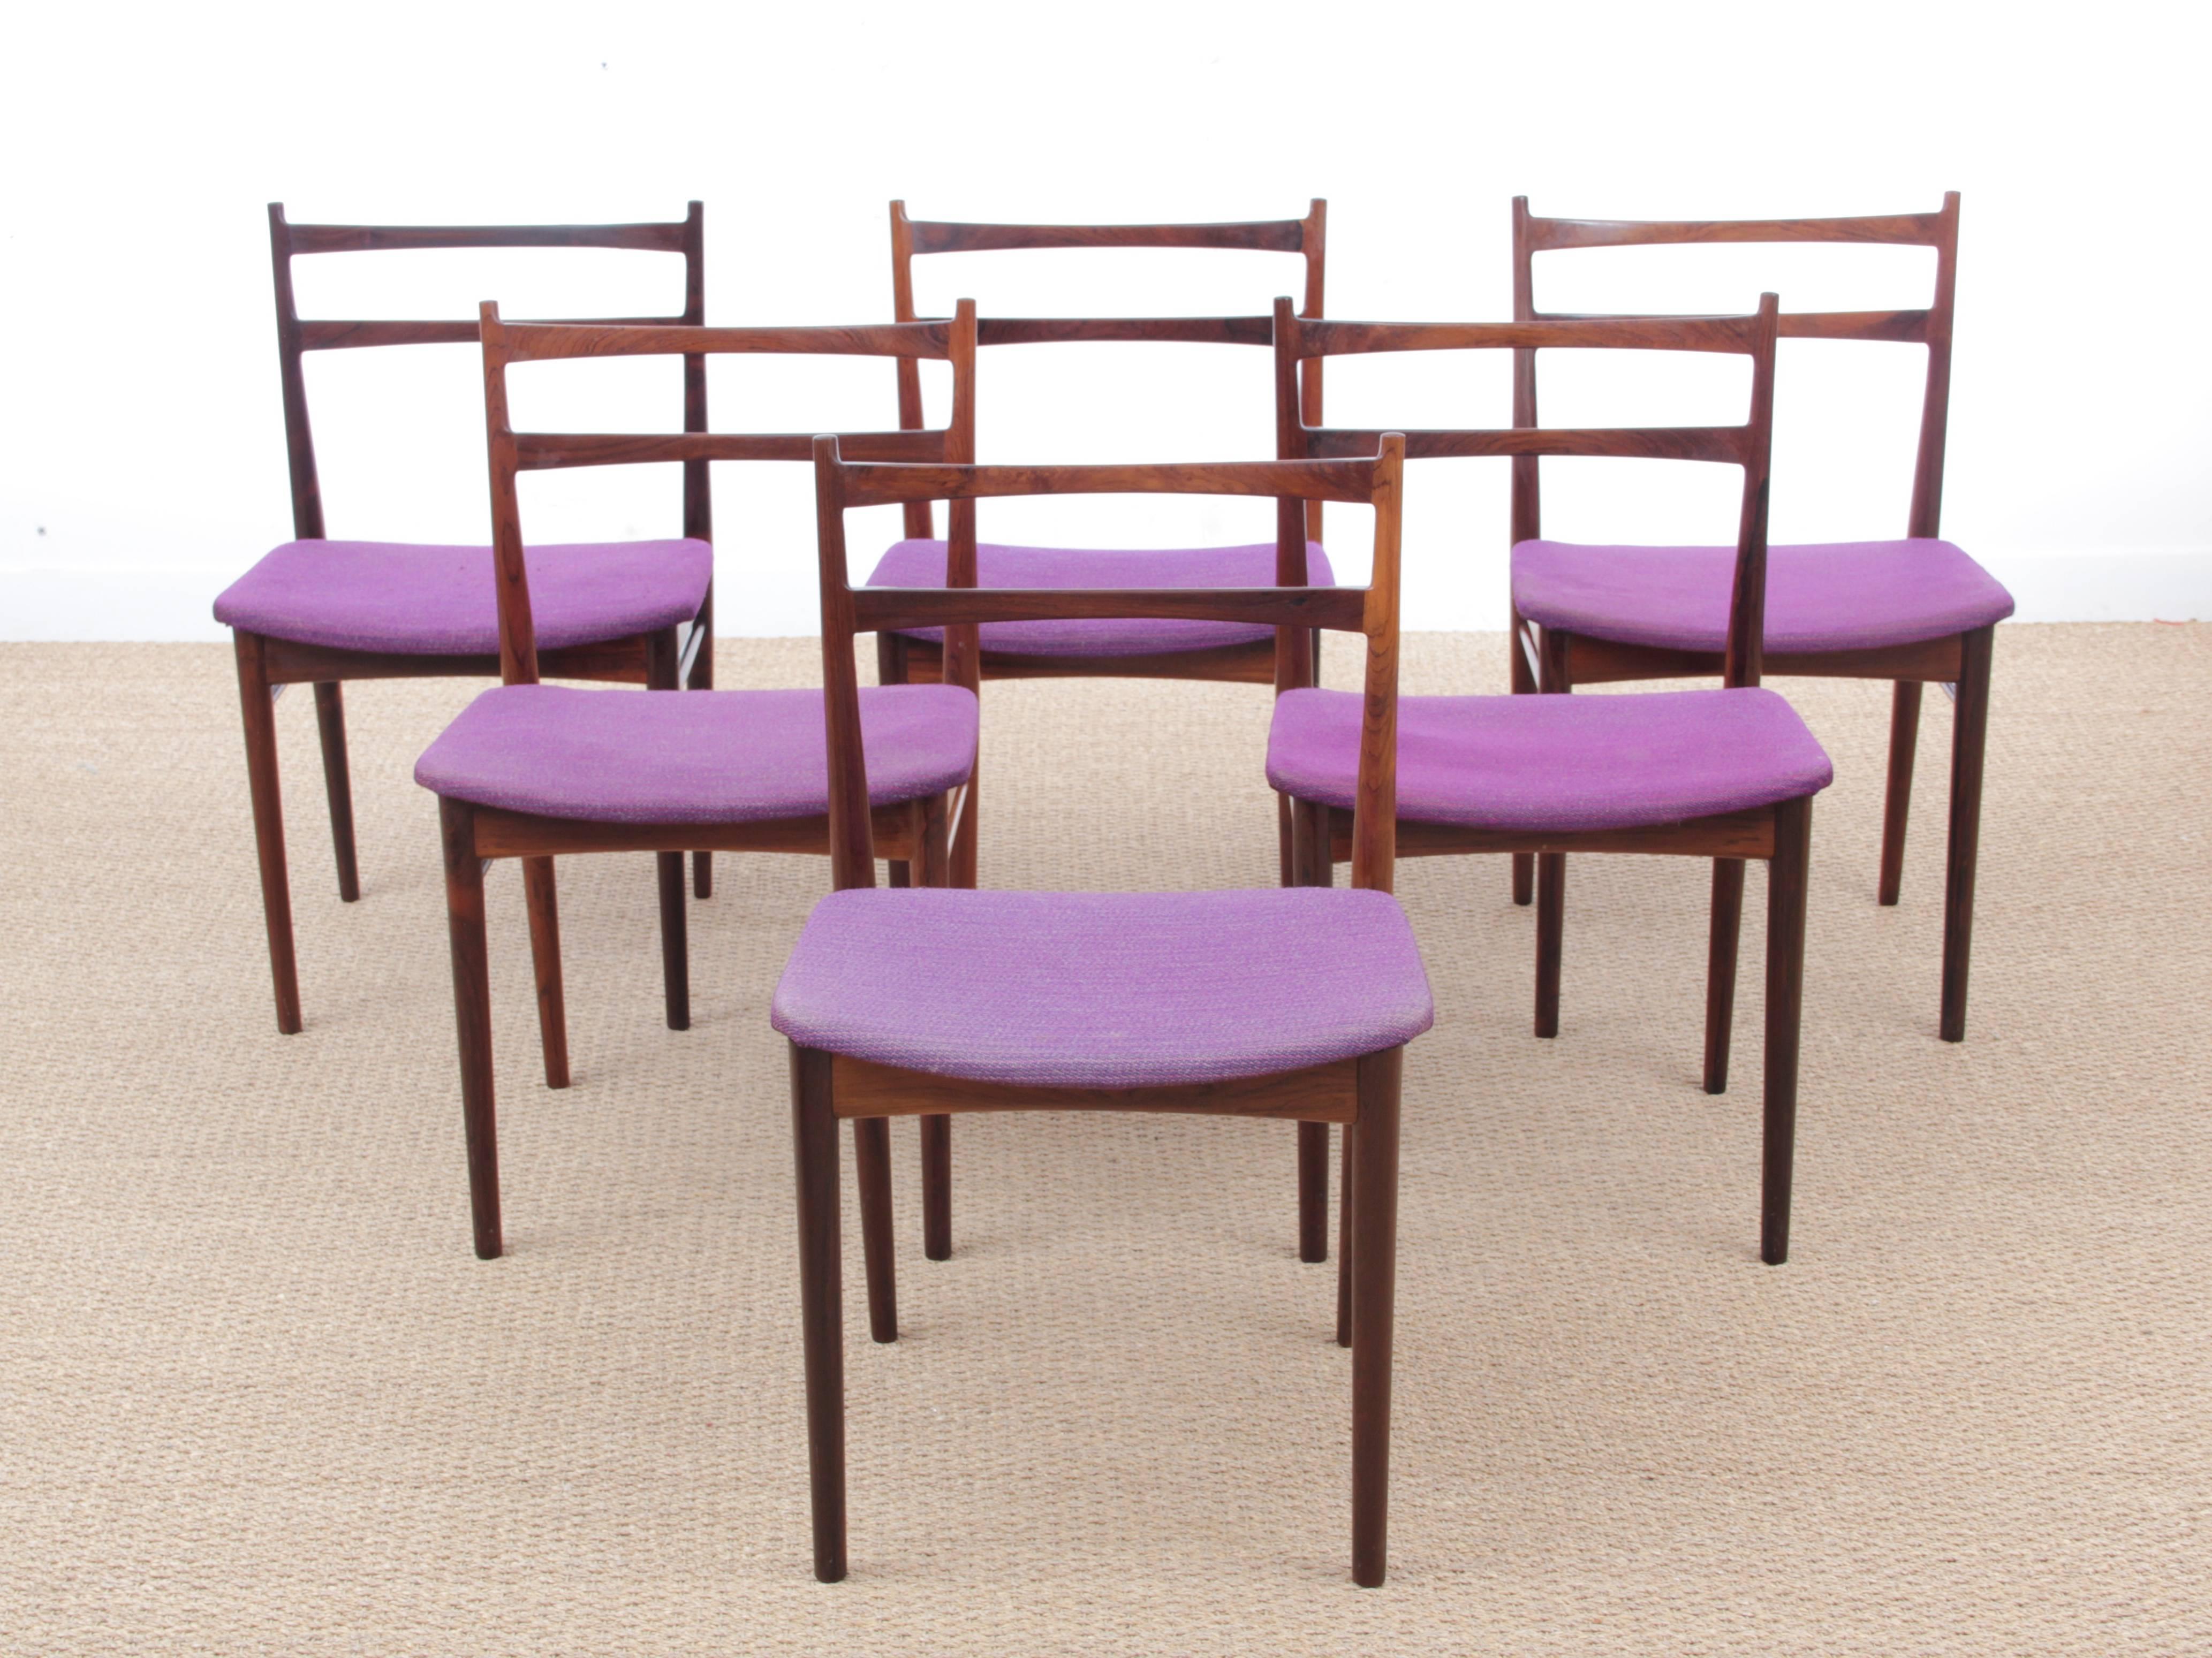 Mid-Century Modern Scandinavian set of six chairs by H. Rosengren Hansen in rosewood. Referenced by the Design Museum Danmark under number RP01659. Original cover seats needed to be reupholstered. New upholstery on demand, leather or fabric : + €180